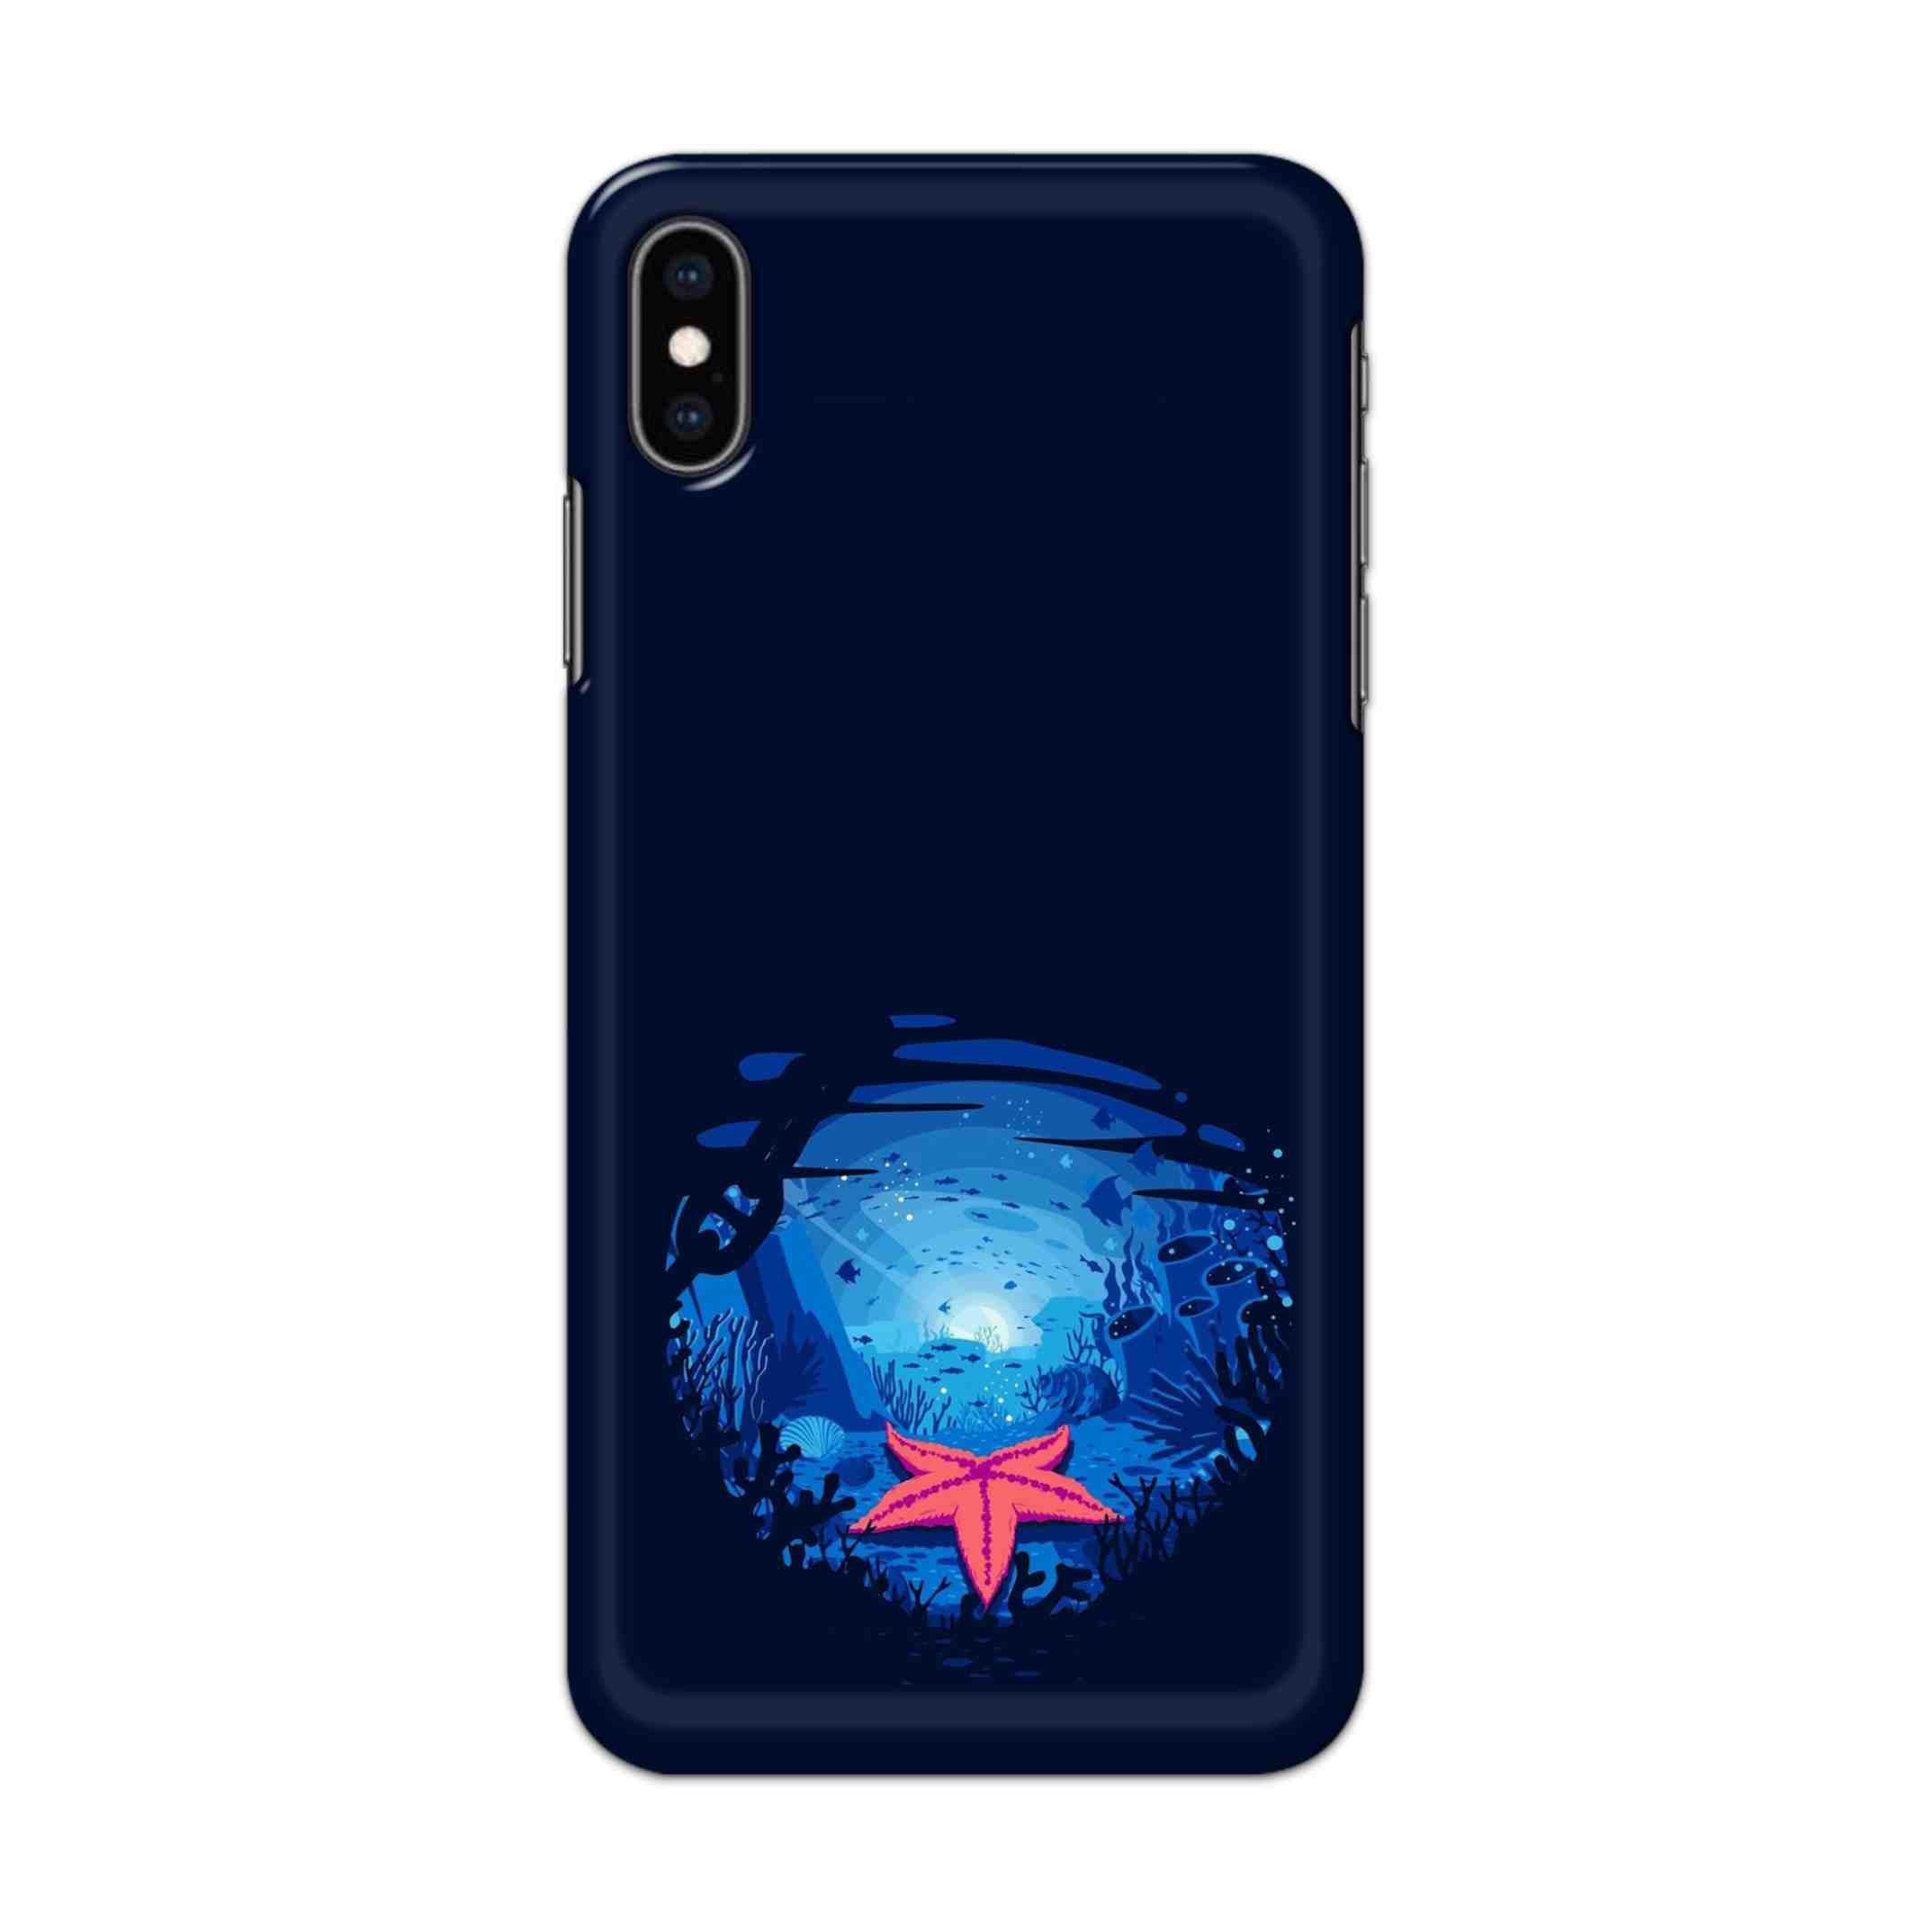 Buy Star Frish Hard Back Mobile Phone Case/Cover For iPhone XS MAX Online